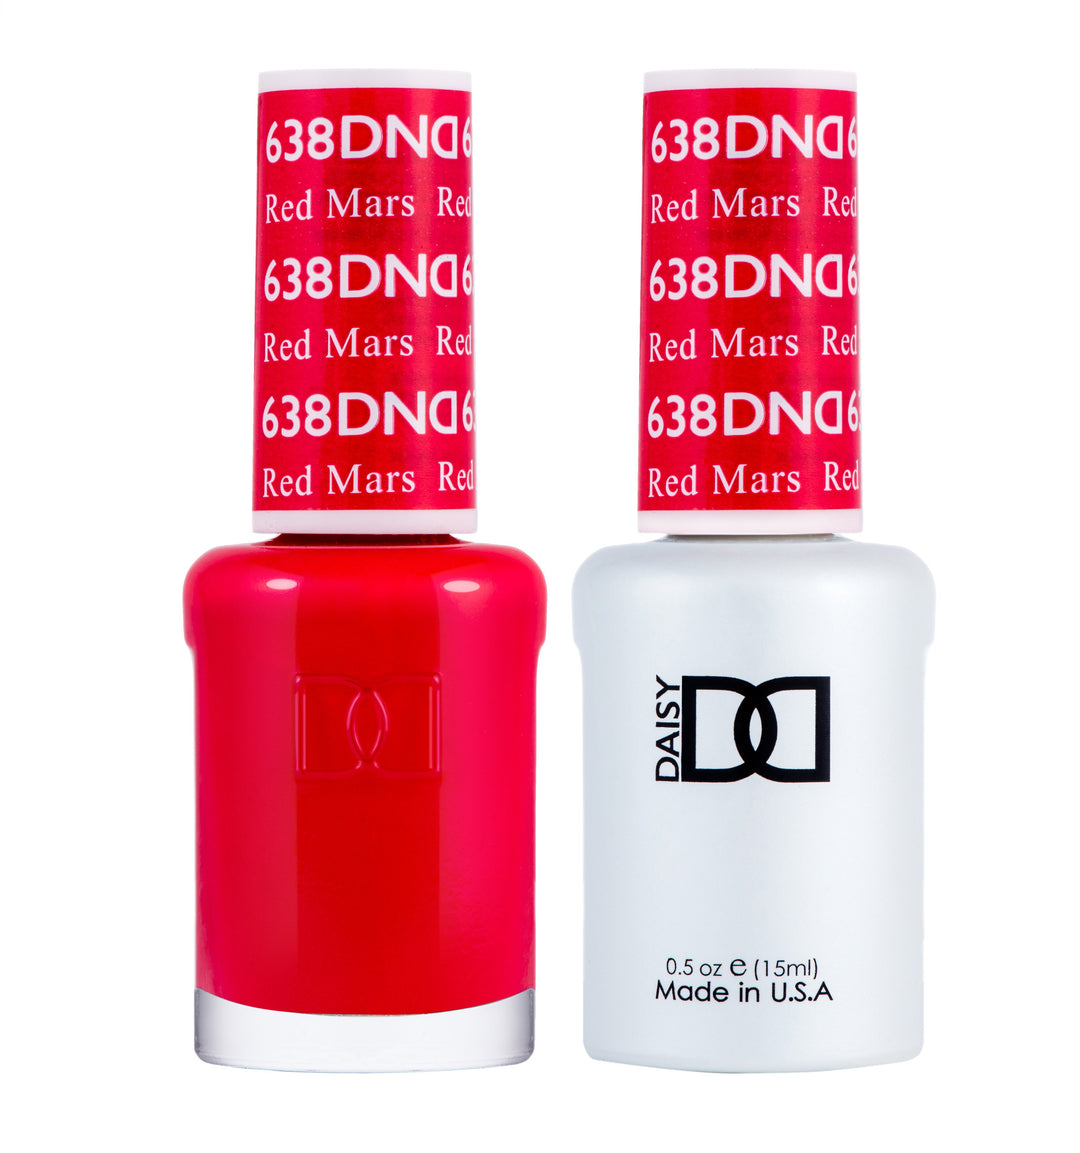 DND DUO Nail Lacquer and UV|LED Gel Polish Red Mars 638 (2 x 15ml)